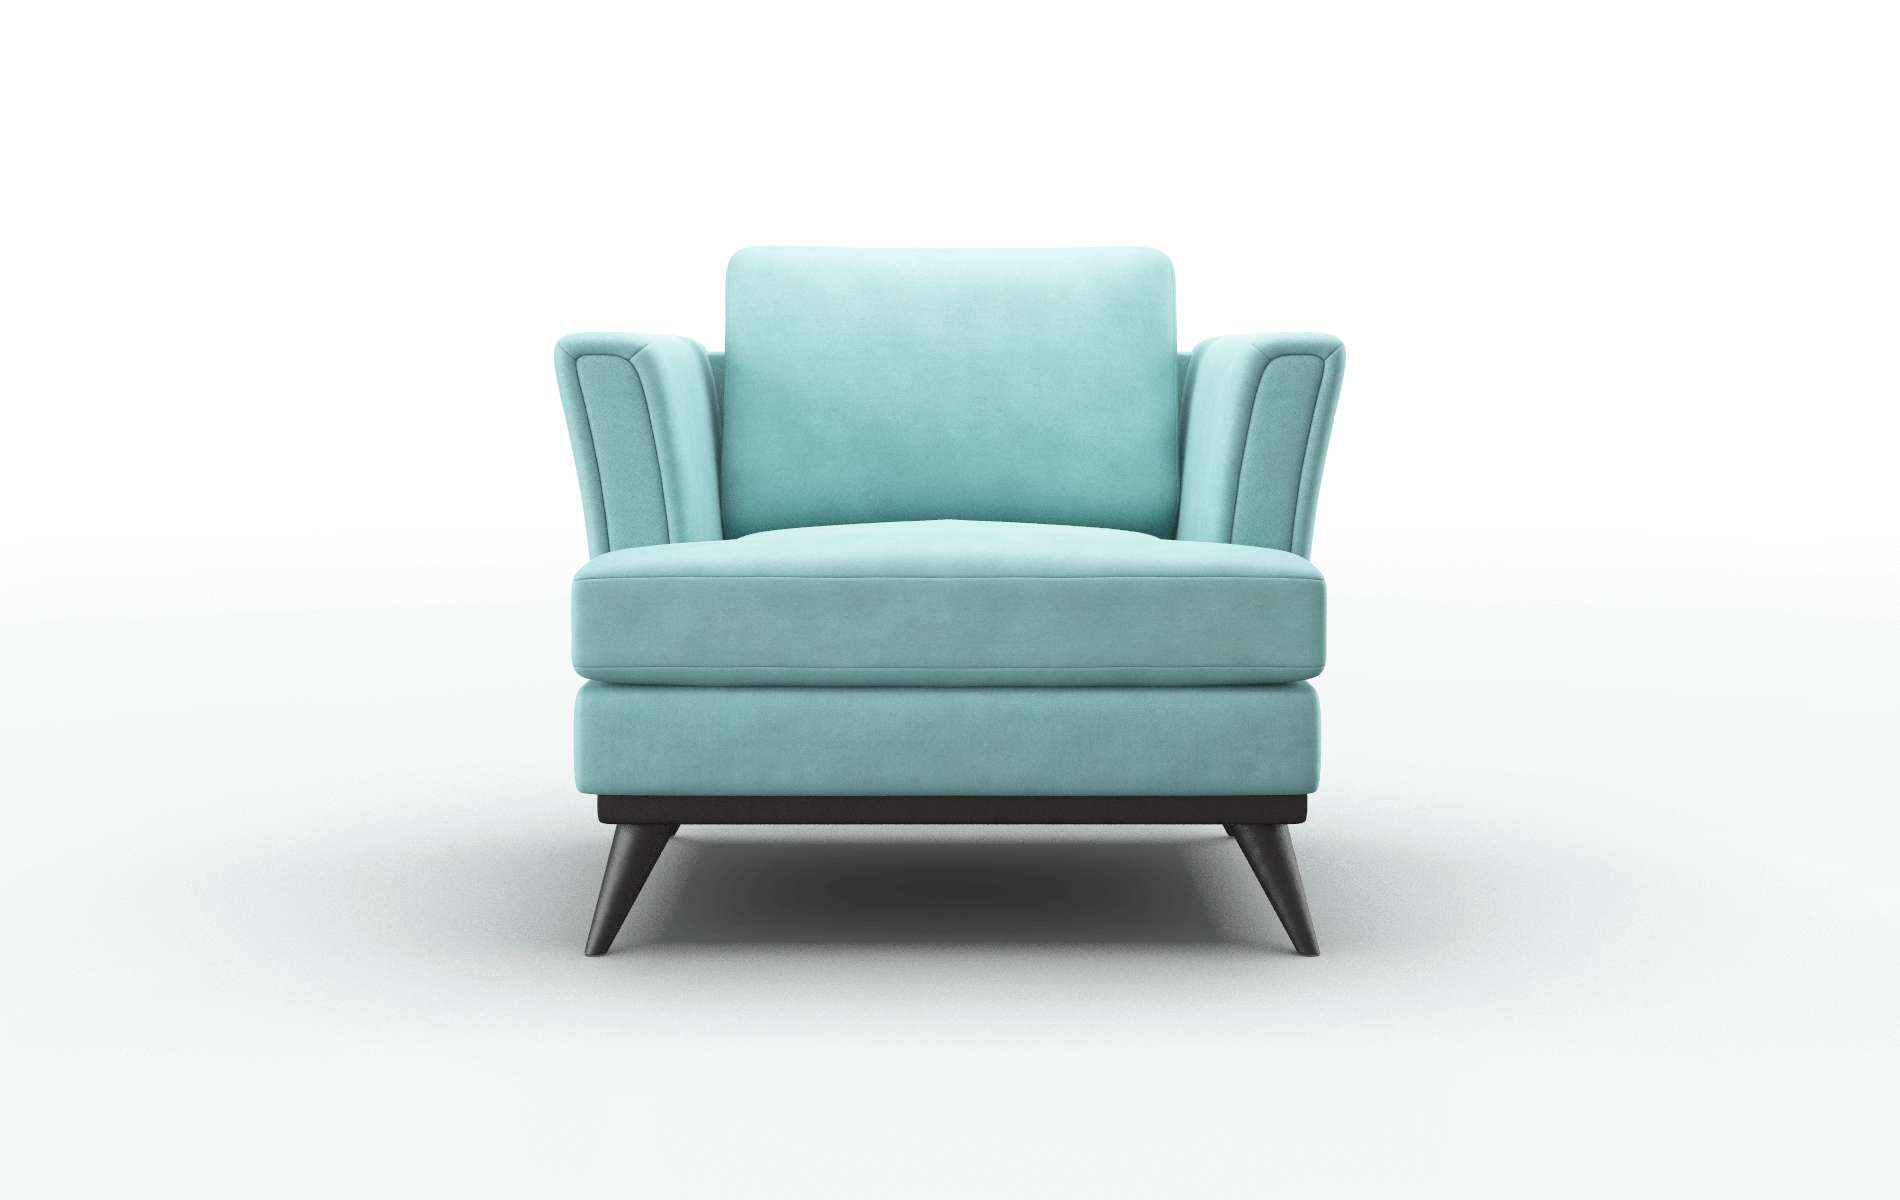 Antalya Curious Turquoise Chair espresso legs 1